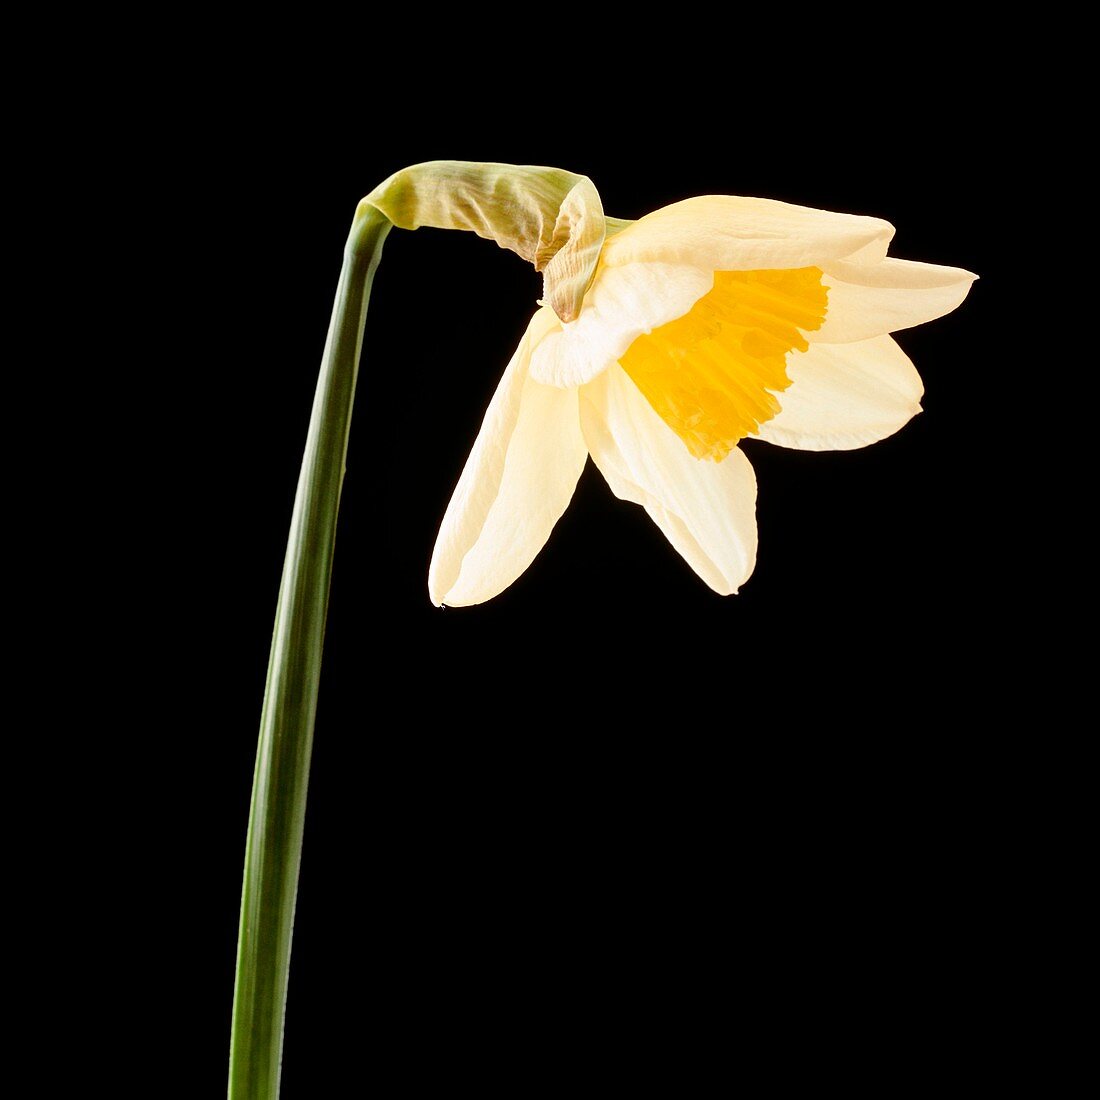 Daffodil flower opening (5 of 6)